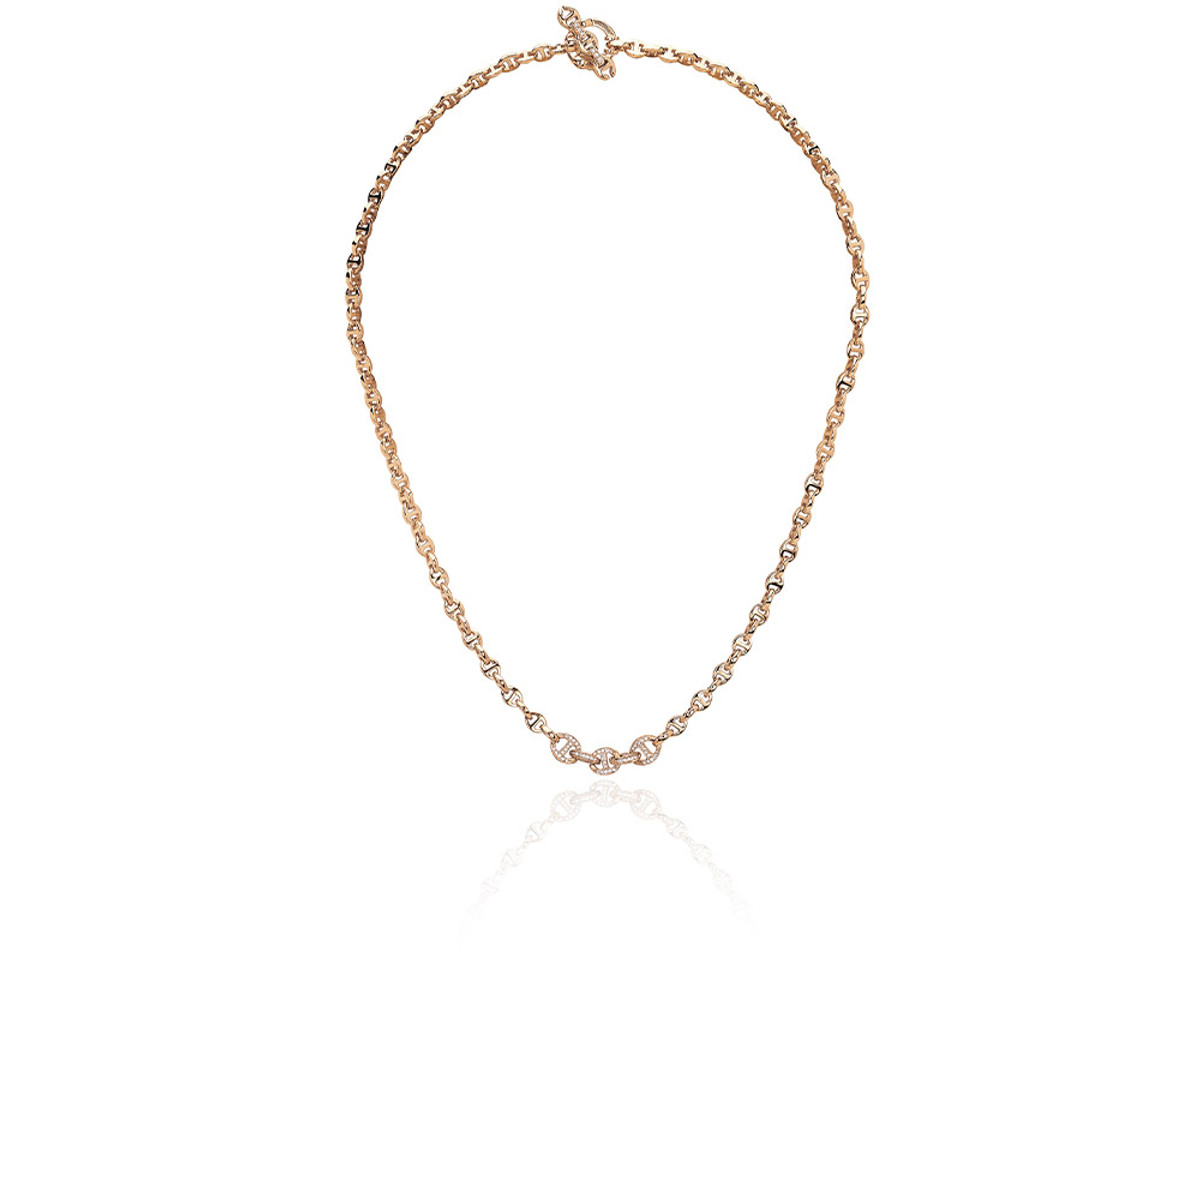 Hoorsenbuhs 18K Yellow Gold 3MM Open-Link Necklace with 5 Link Pave-57479 Product Image